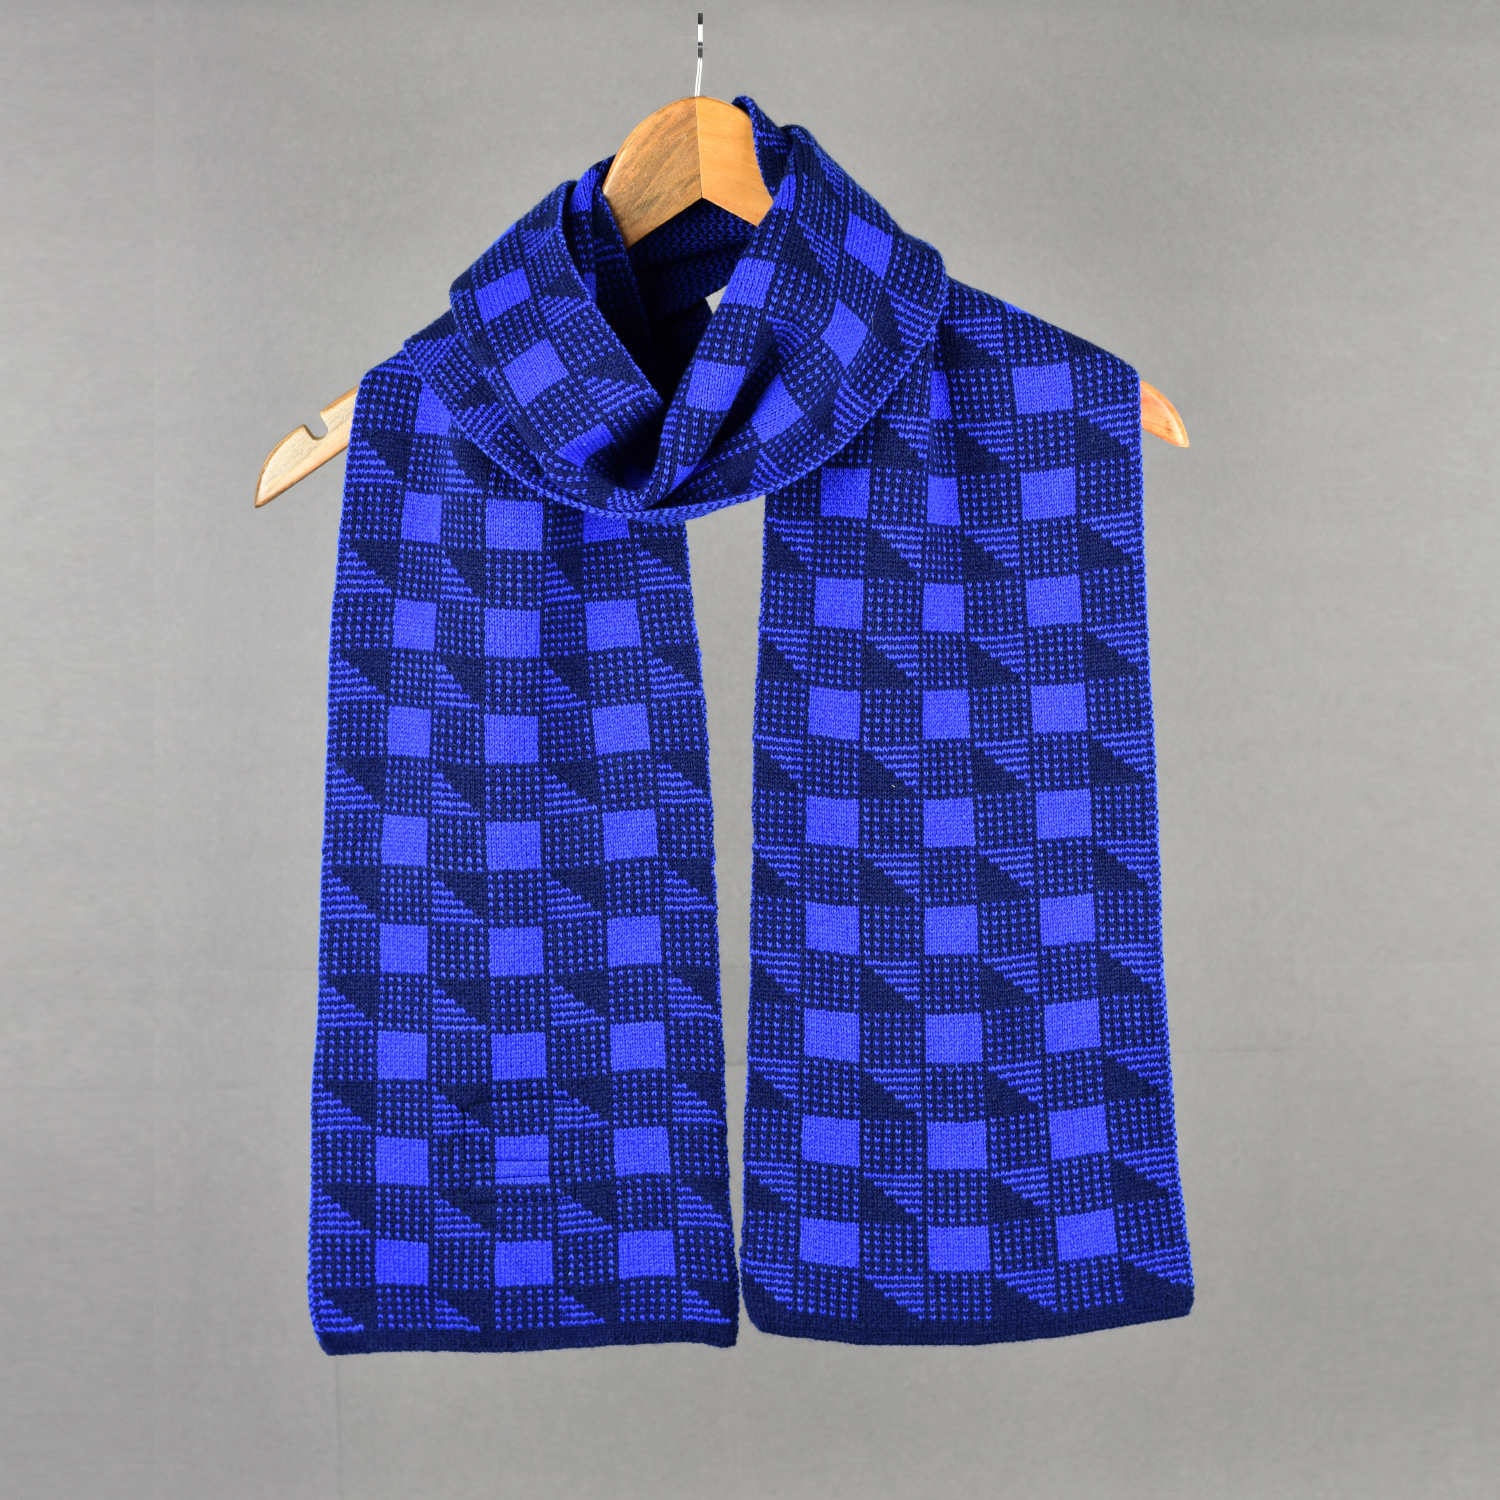 thepatternguild_knitted_scarf_cubes_blue1.jpg